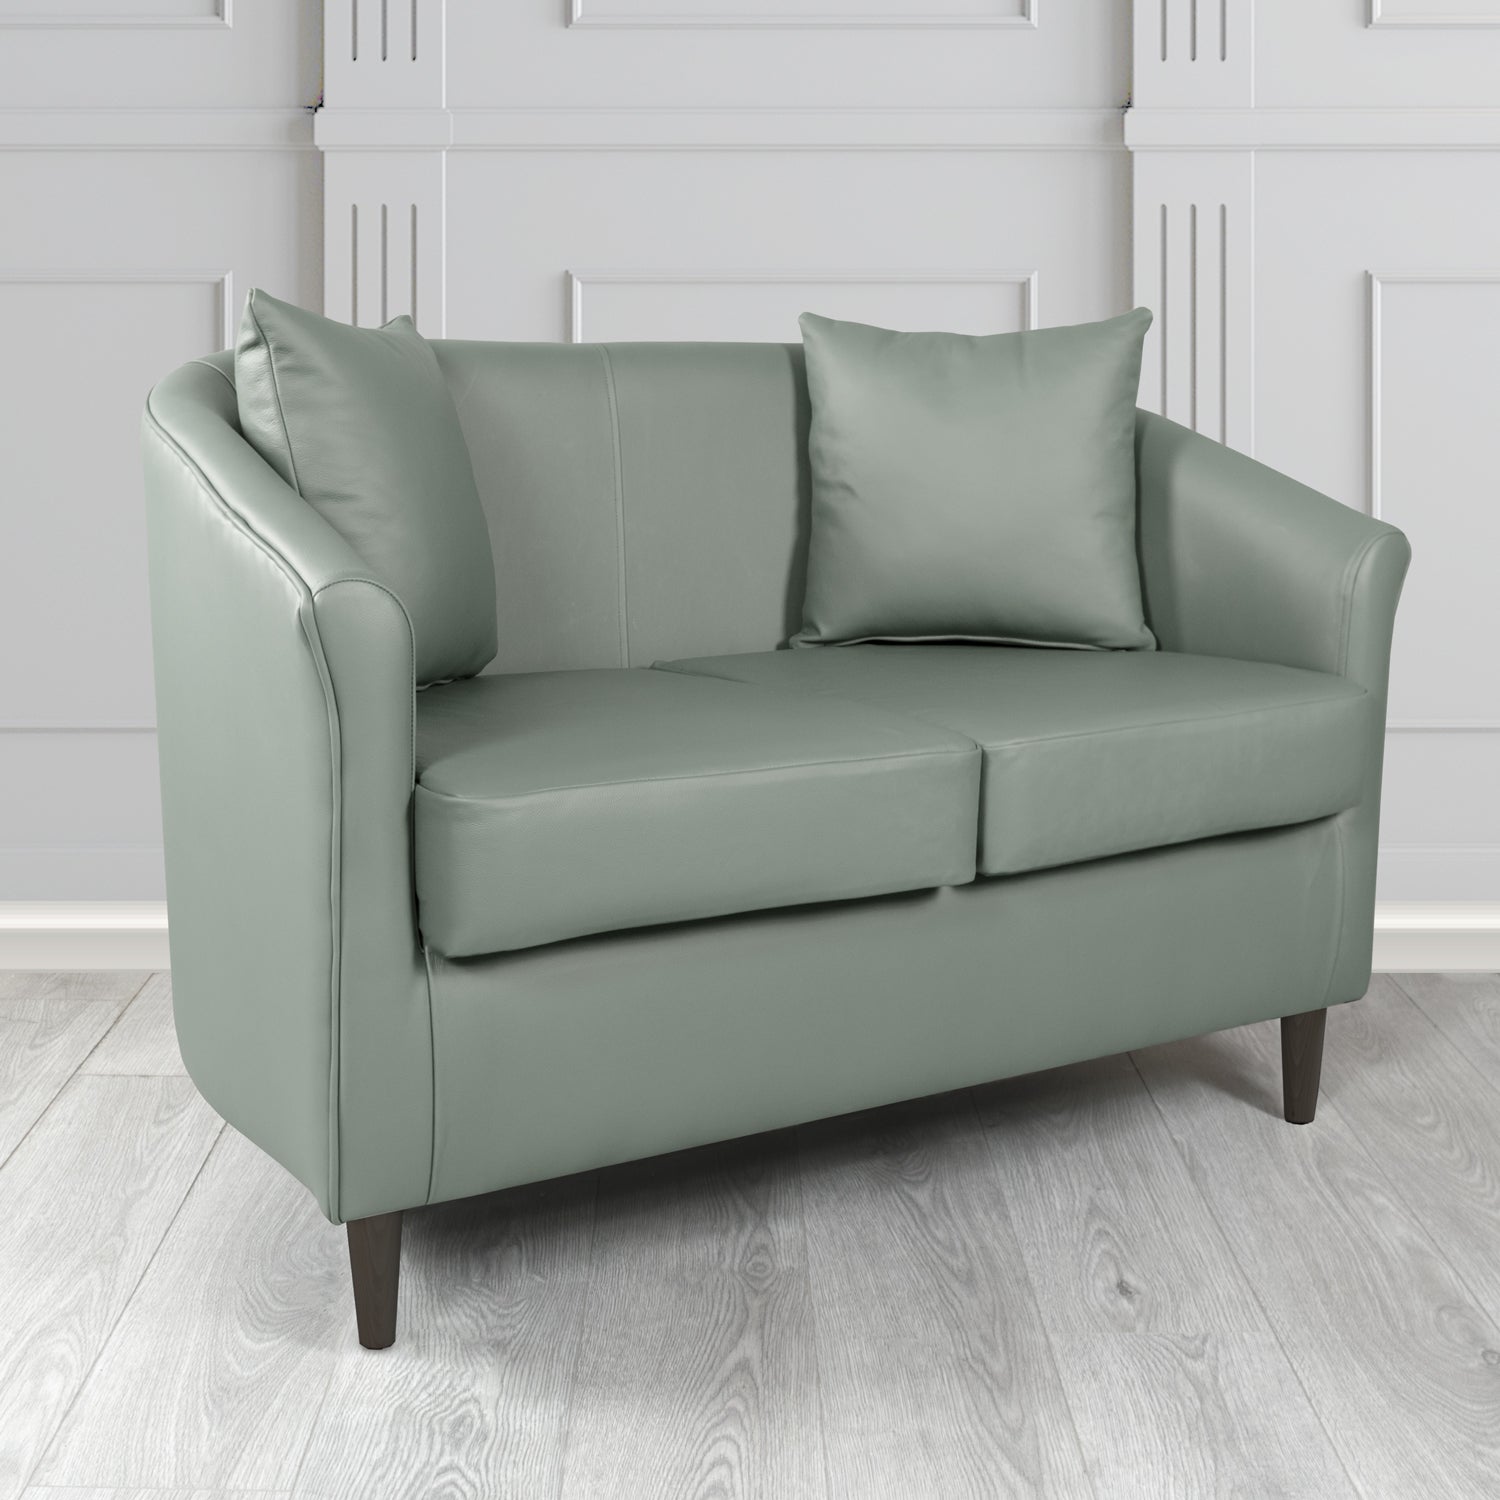 St Tropez Shelly Piping Crib 5 Genuine Leather 2 Seater Tub Sofa with Scatter Cushions - The Tub Chair Shop